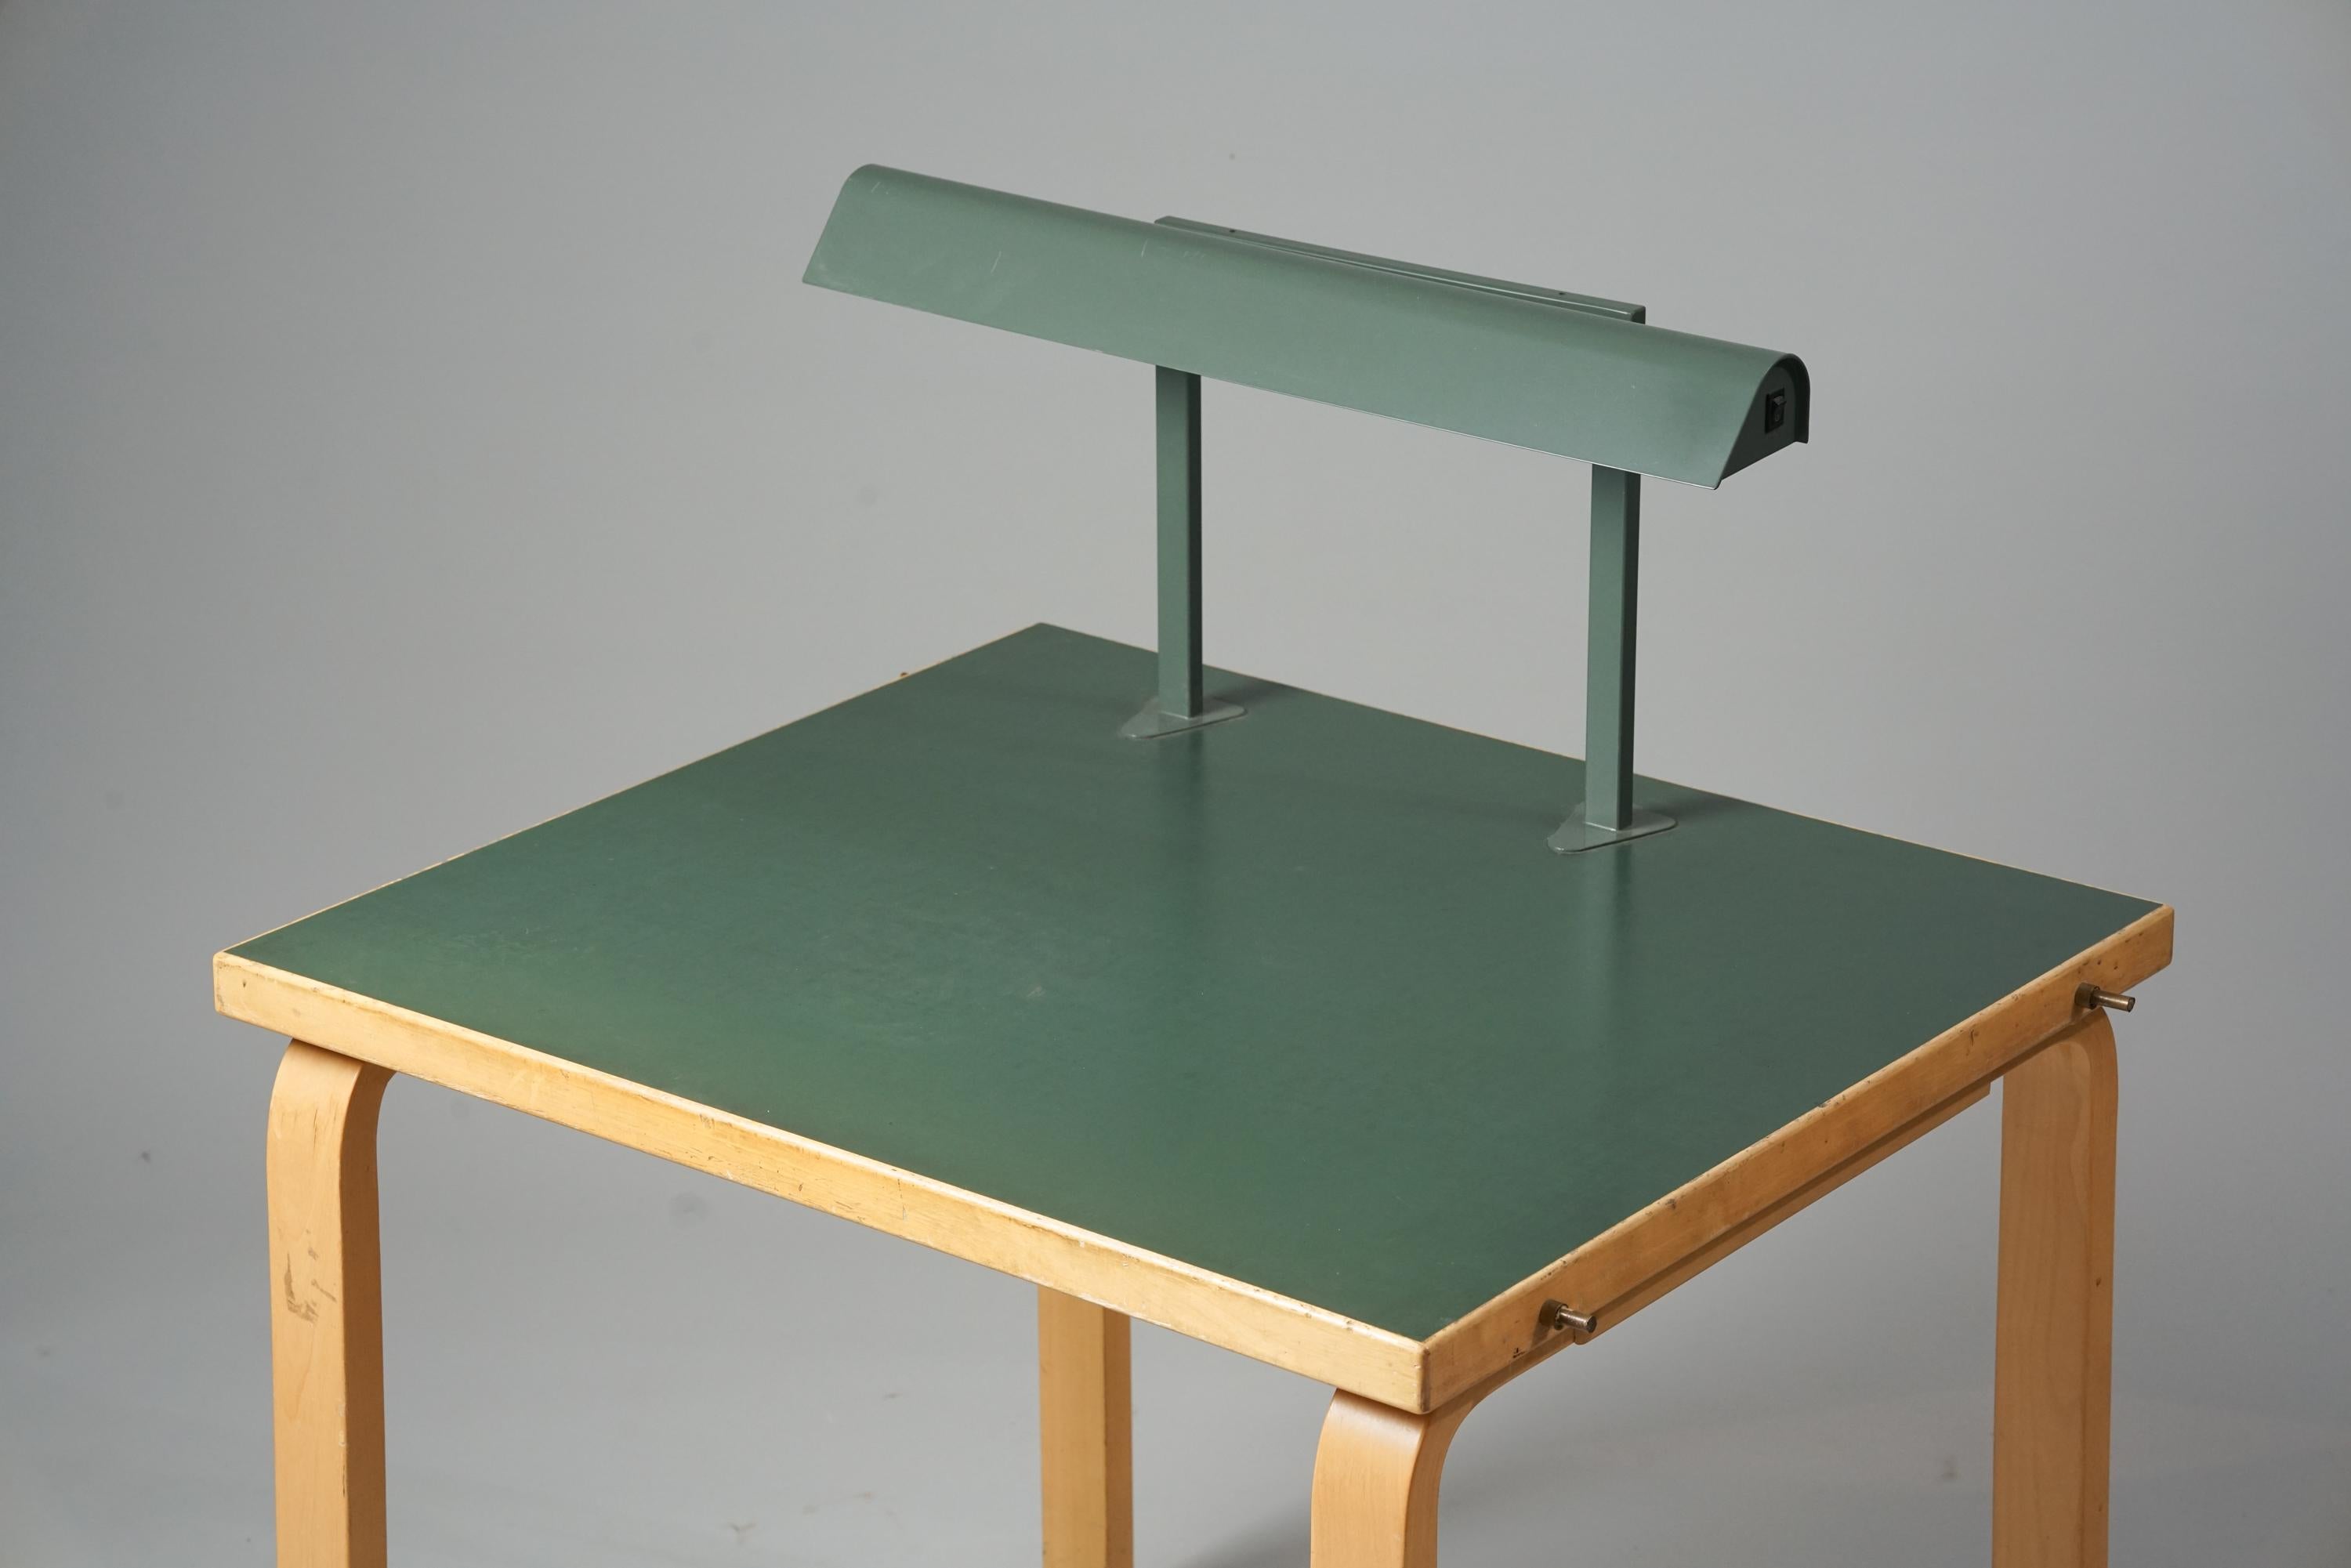 Rare writing table, designed by Alvar Aalto, 1960s. Birch with linoleum table top. Later modified with the reading lamp. The writing table is from the Otaniemi Technical University. Documented. Good vintage condition, minor patina consistent with